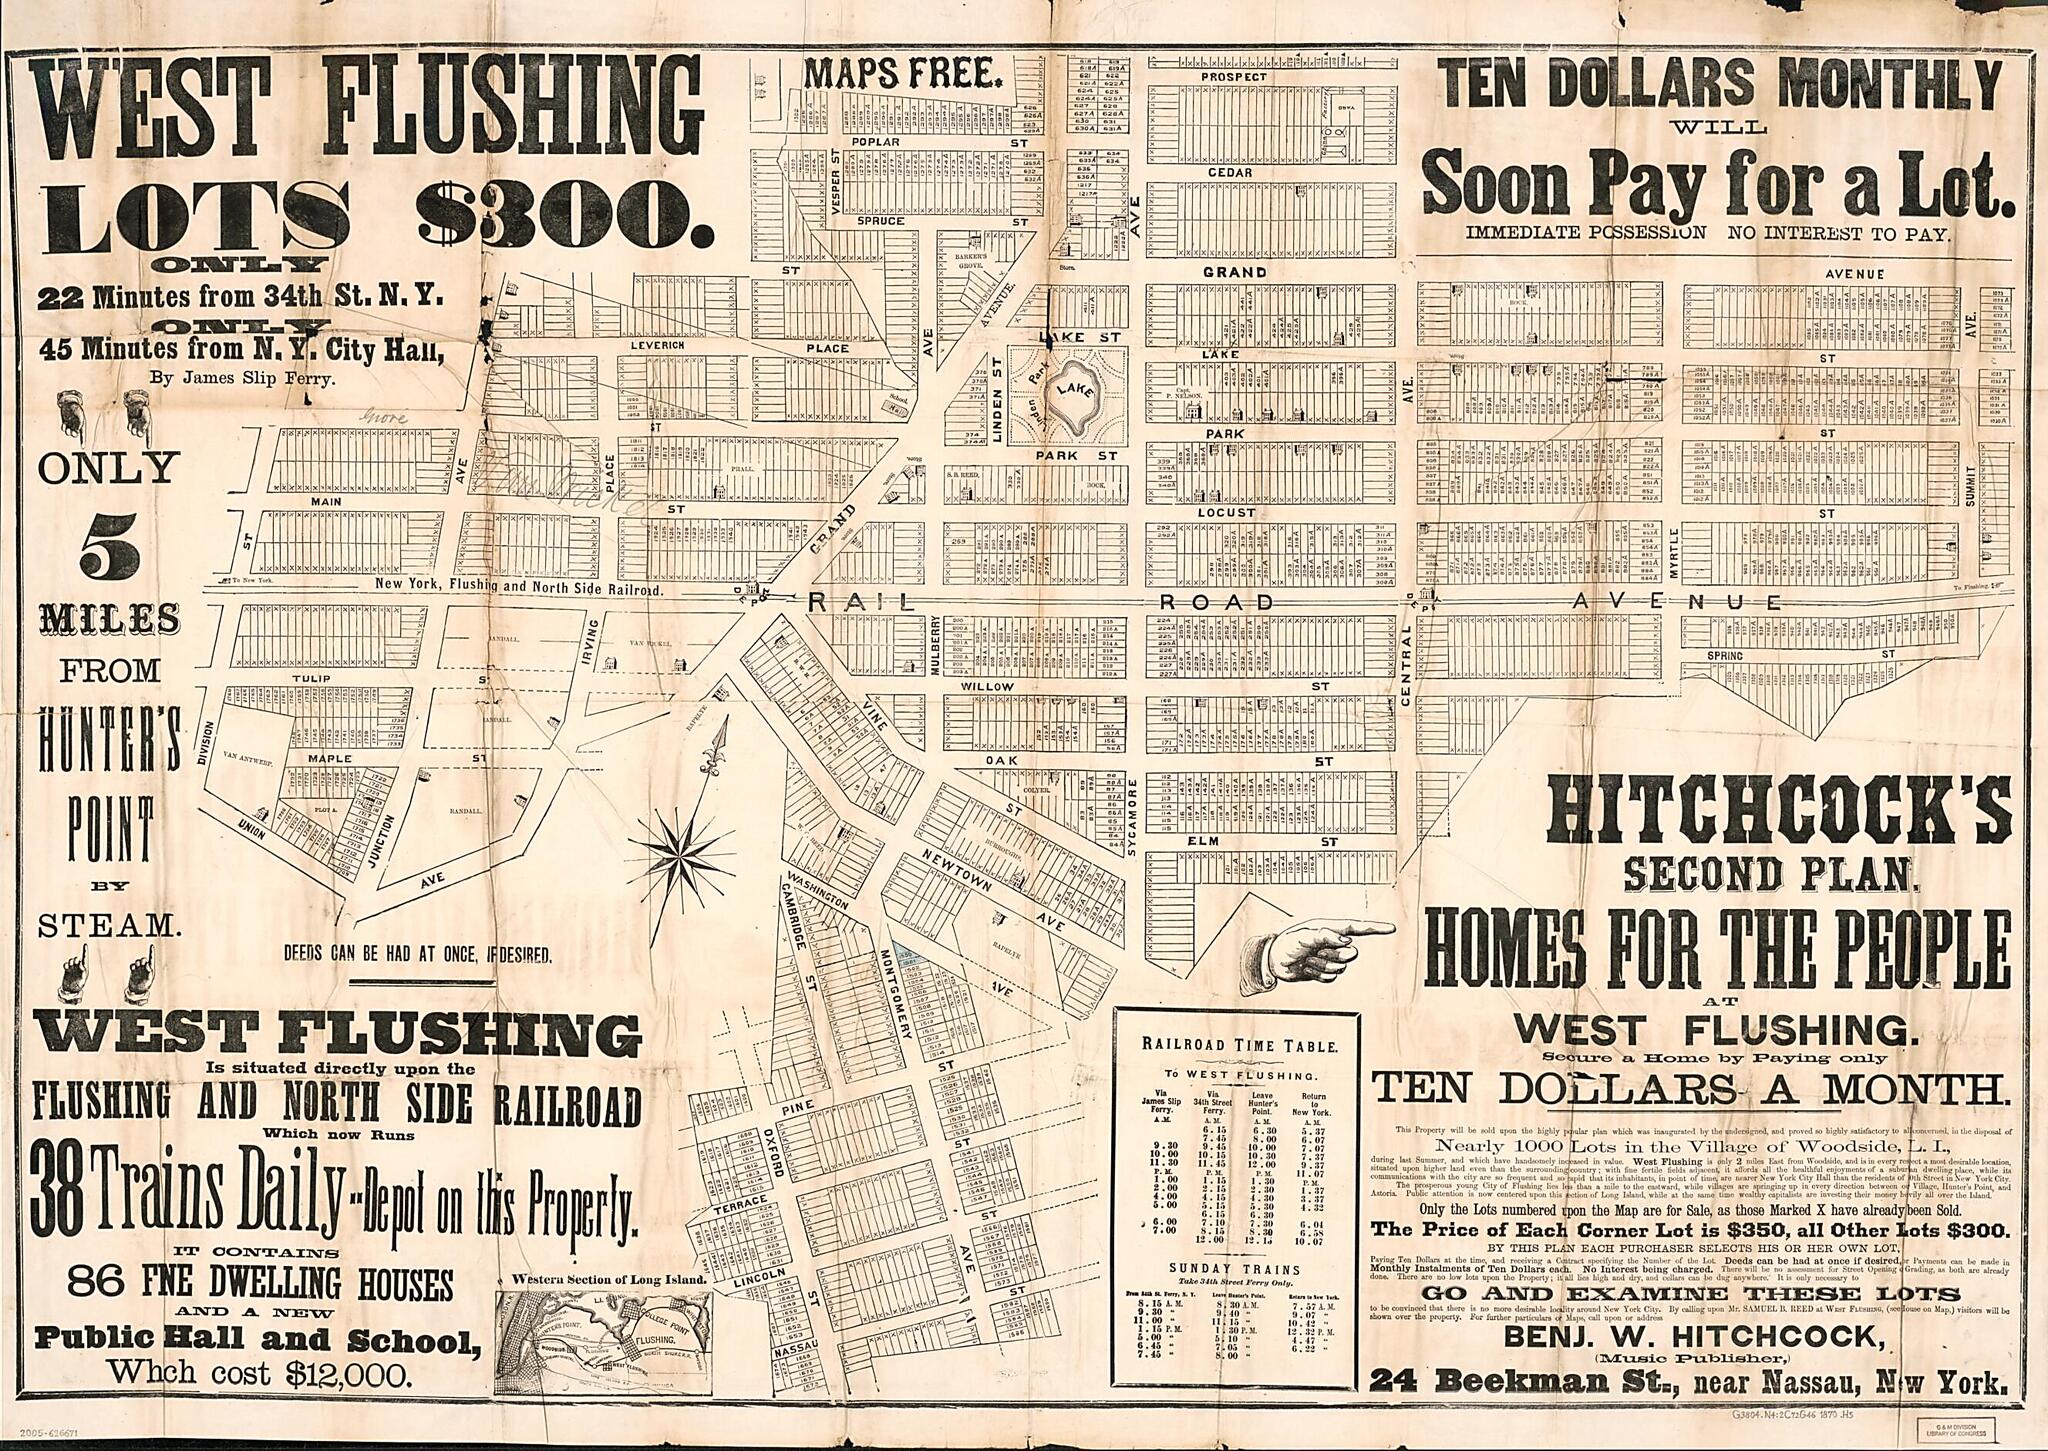 This old map of -homes for the People at West Flushing : Corona, Queens County, Long Island, New York. (West Flushing, Lots $300 :) from 1870 was created by Benjamin W. Hitchcock in 1870